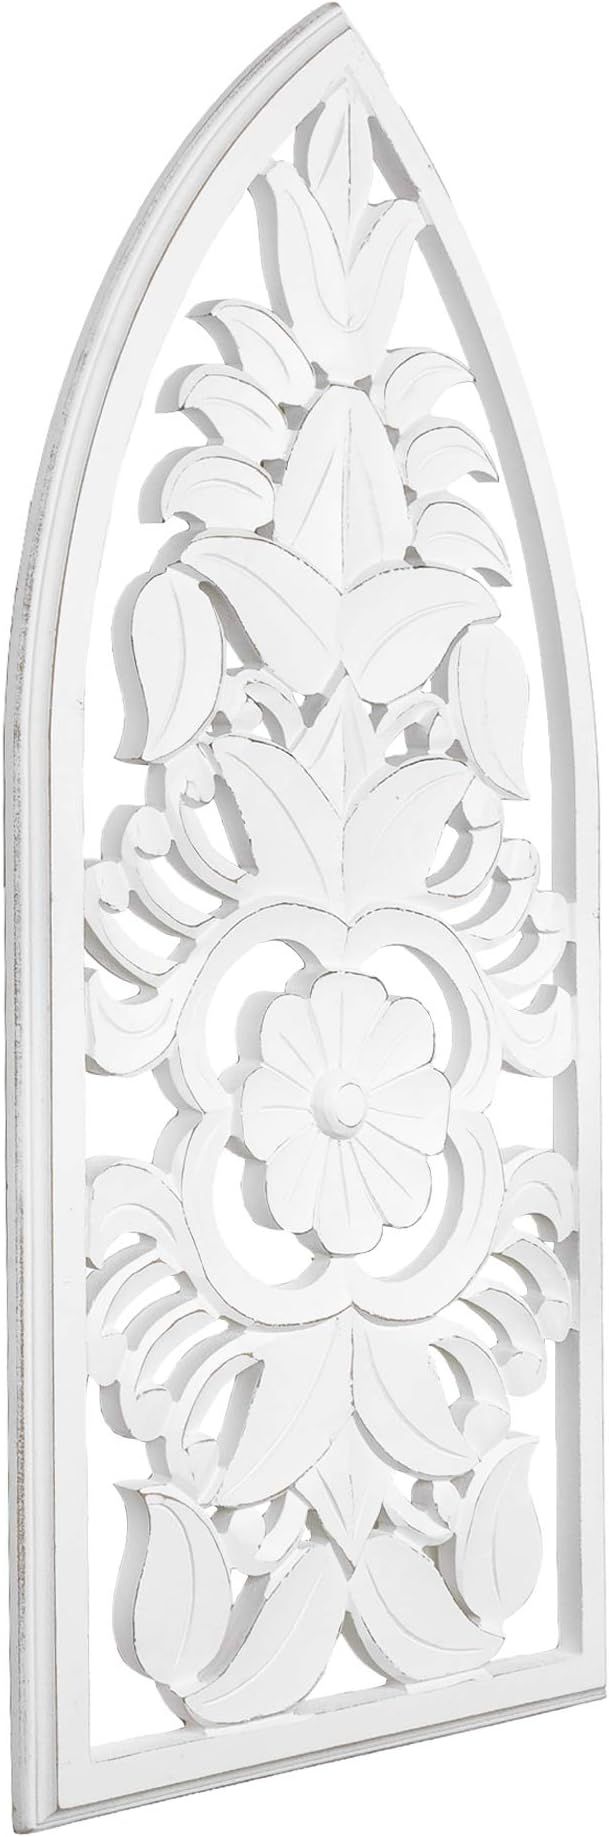 American Art Decor Cathedral Style Hand-Carved Wood Wall Panel, Carved Out Antique Floral Wall De... | Amazon (US)